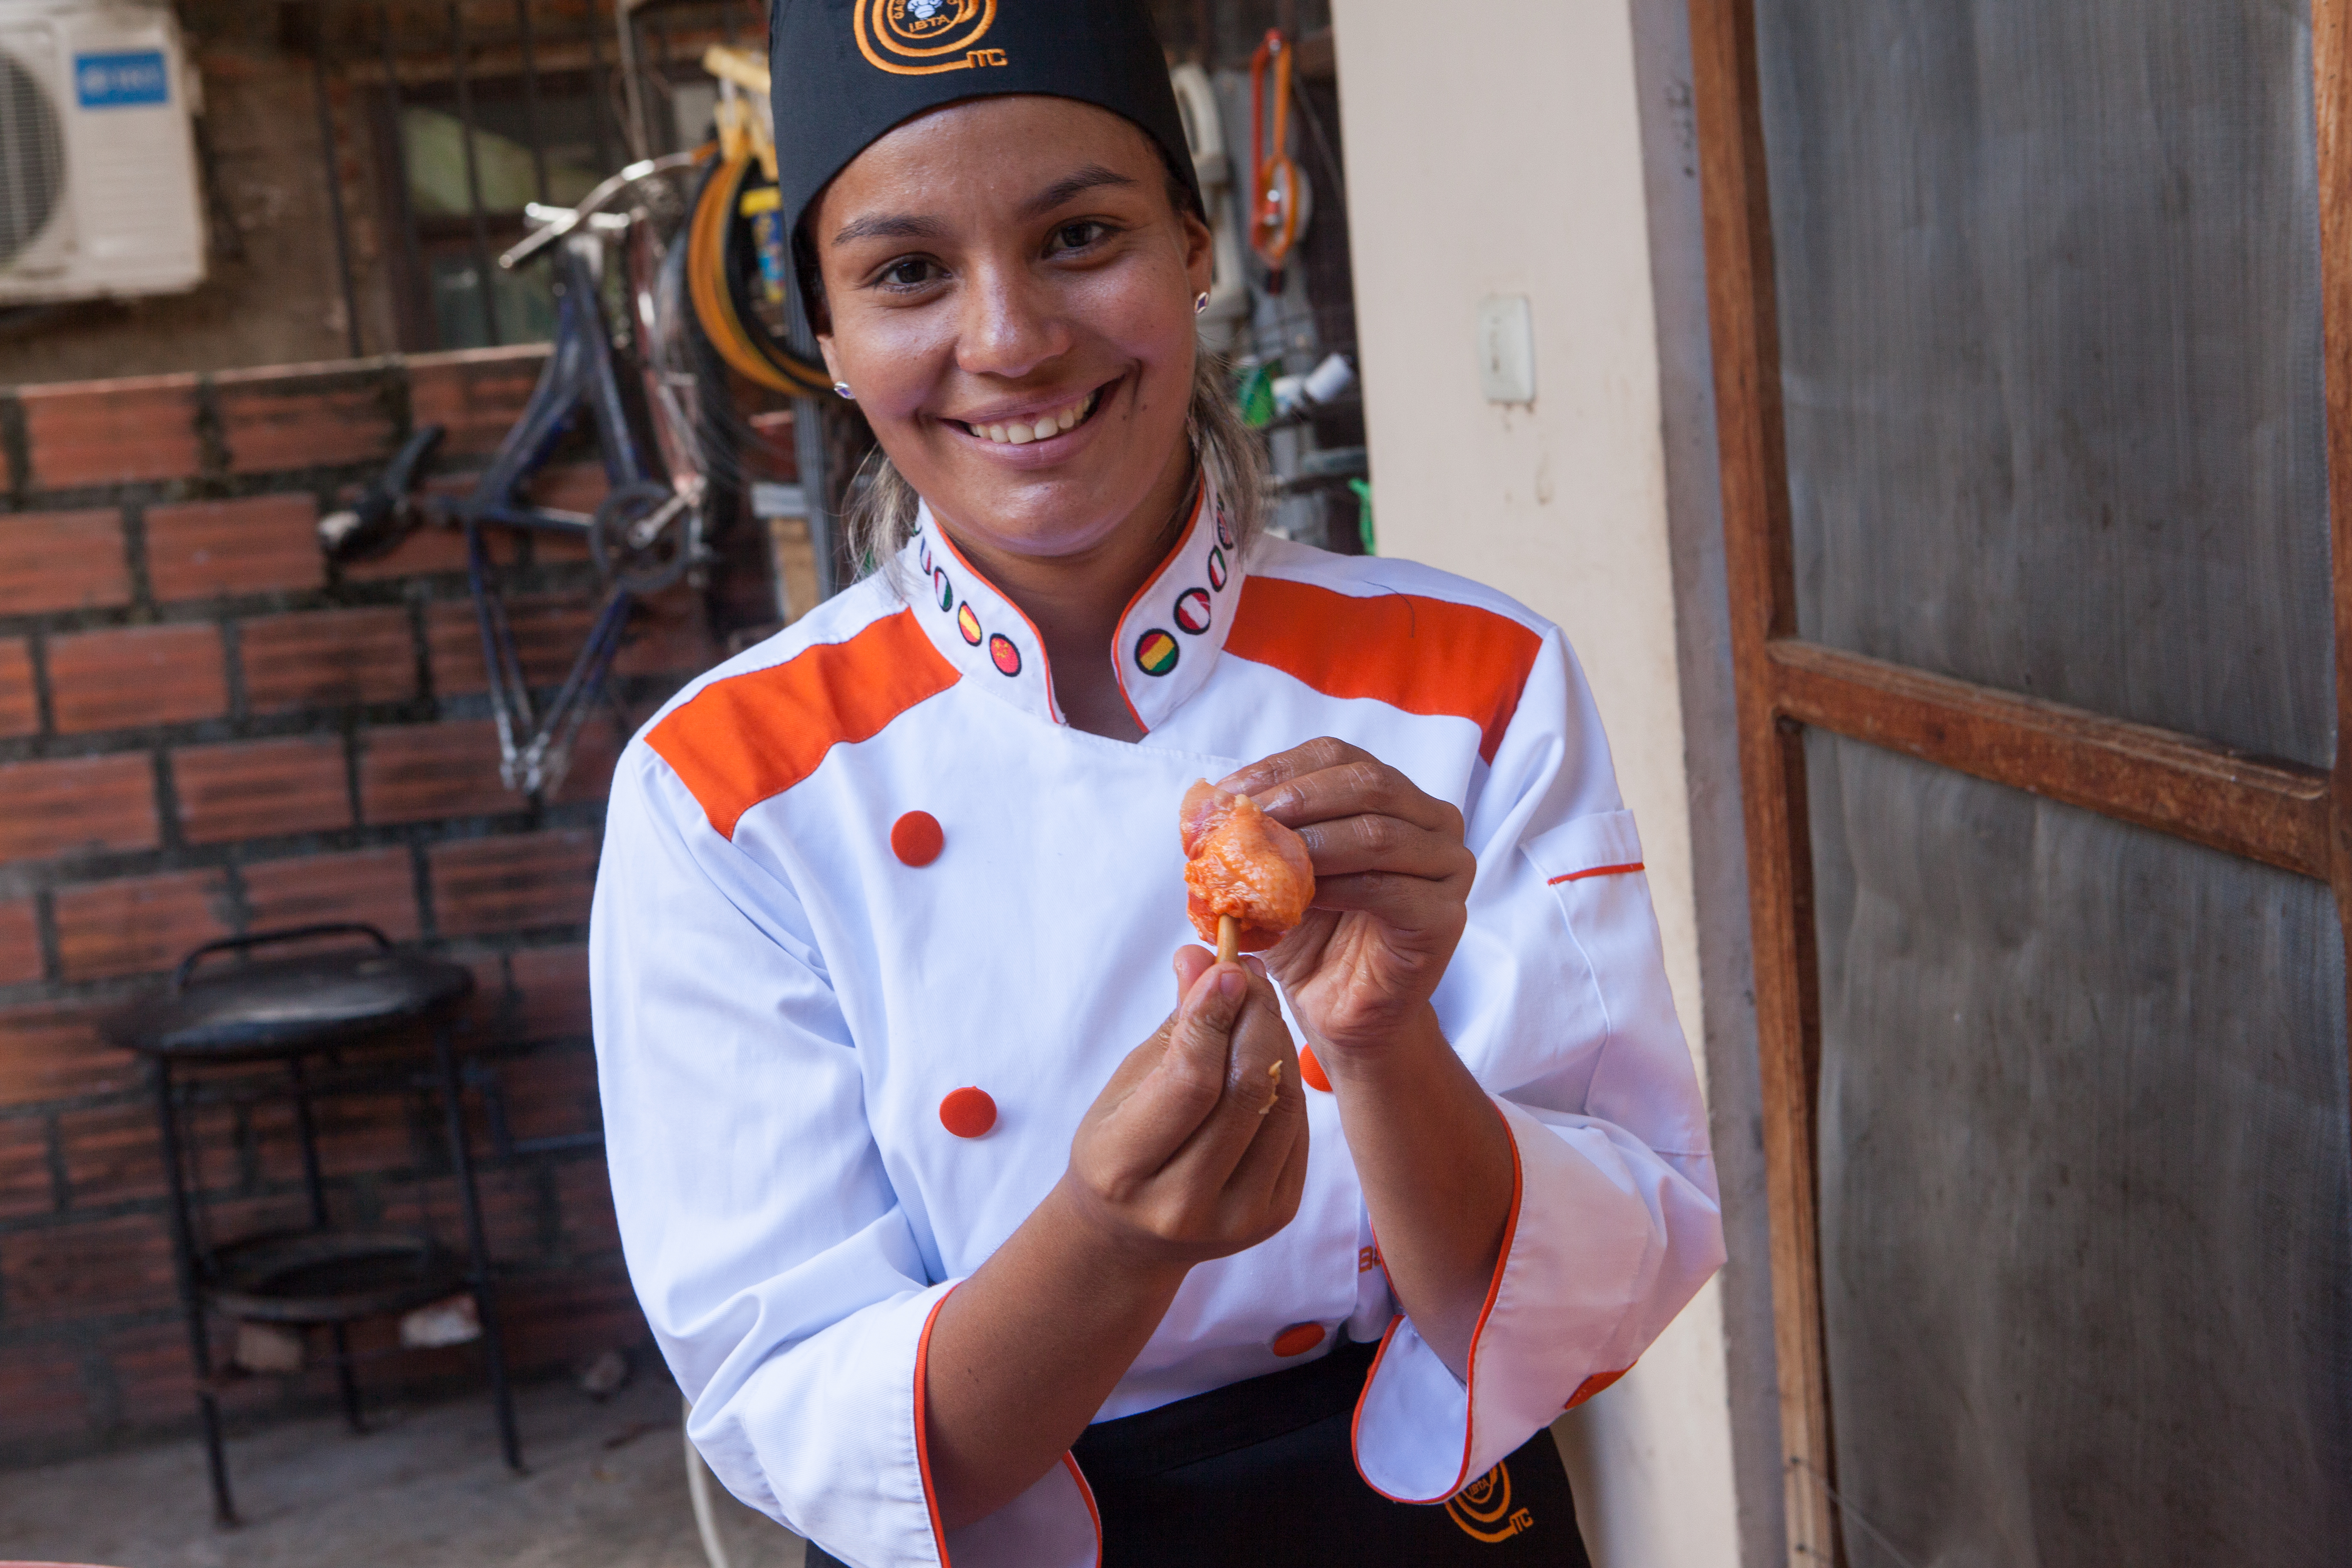 Dayana Suárez Pizarro, 26, received cooking and baking training at El Comedor de Niños (the Comedor), an MCC partner, and now has a catering and event coordinating business called Catering A and B.